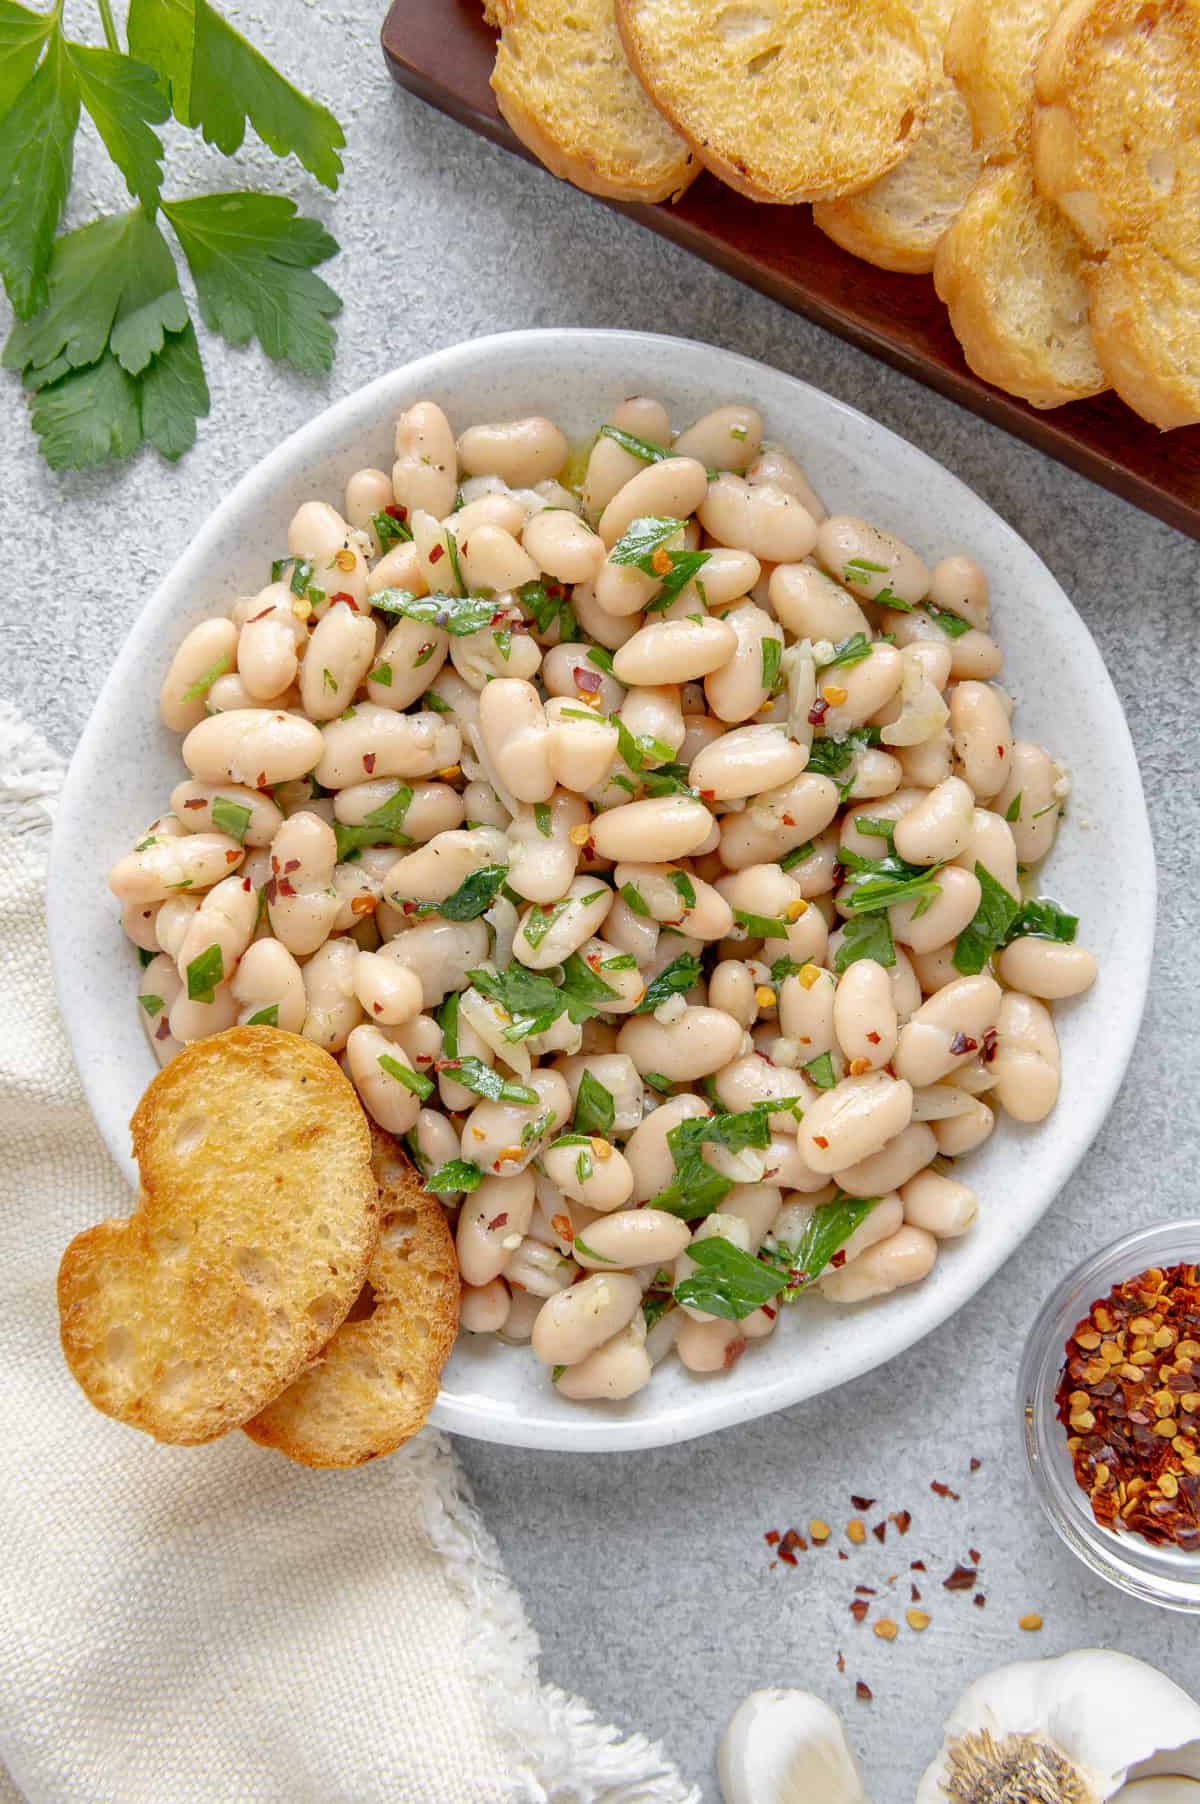 Tuscan bean salad on a serving plate with crunchy crostini.